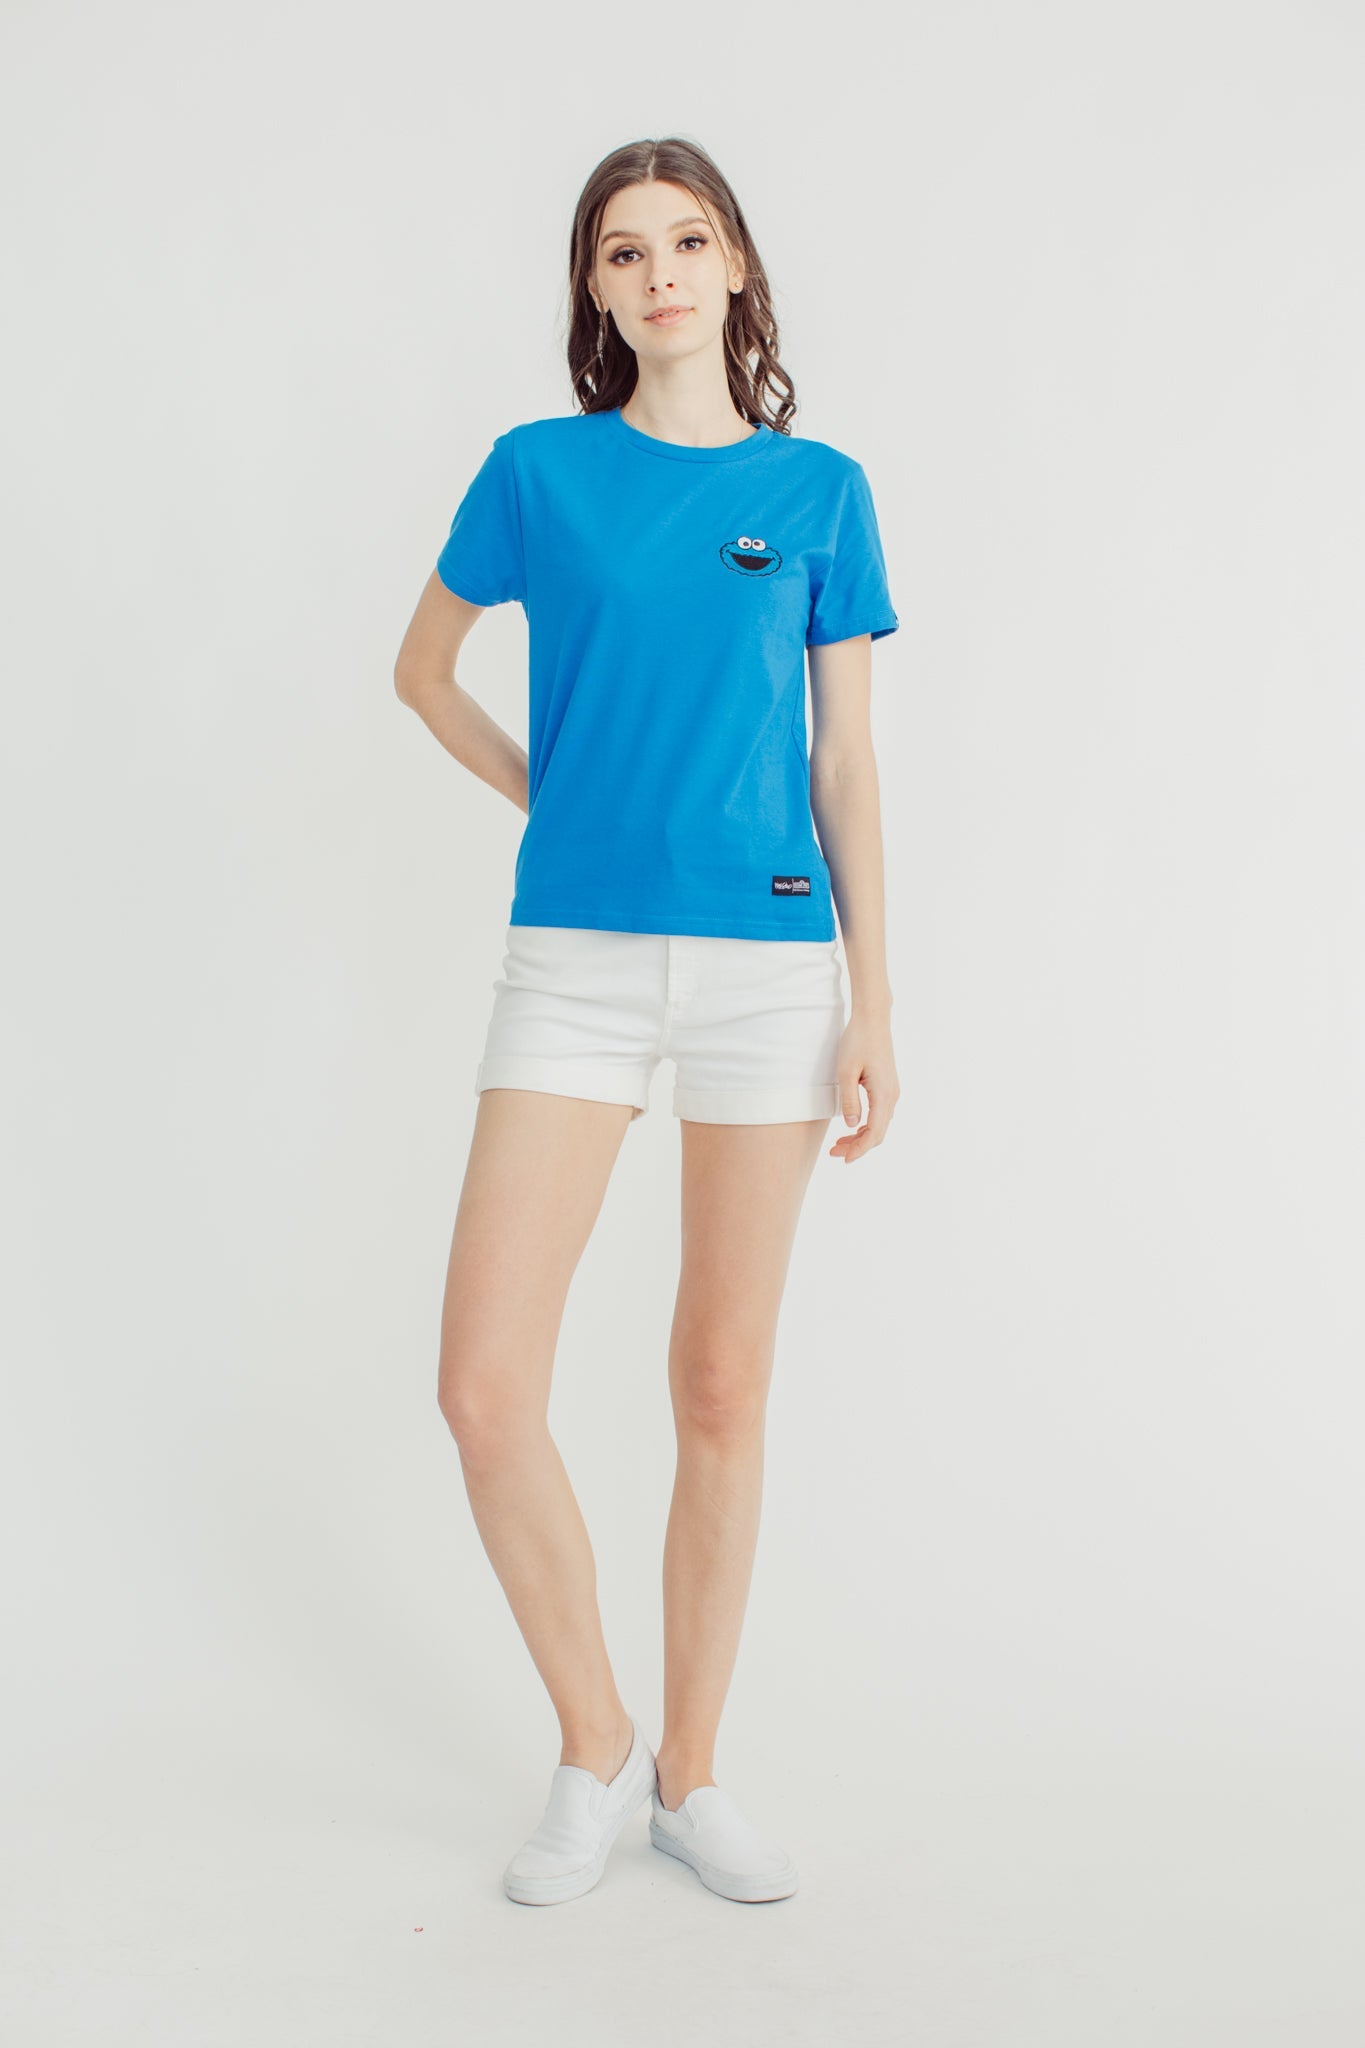 Daphne with Cookie Monster Head Classic Fit Tee - Mossimo PH